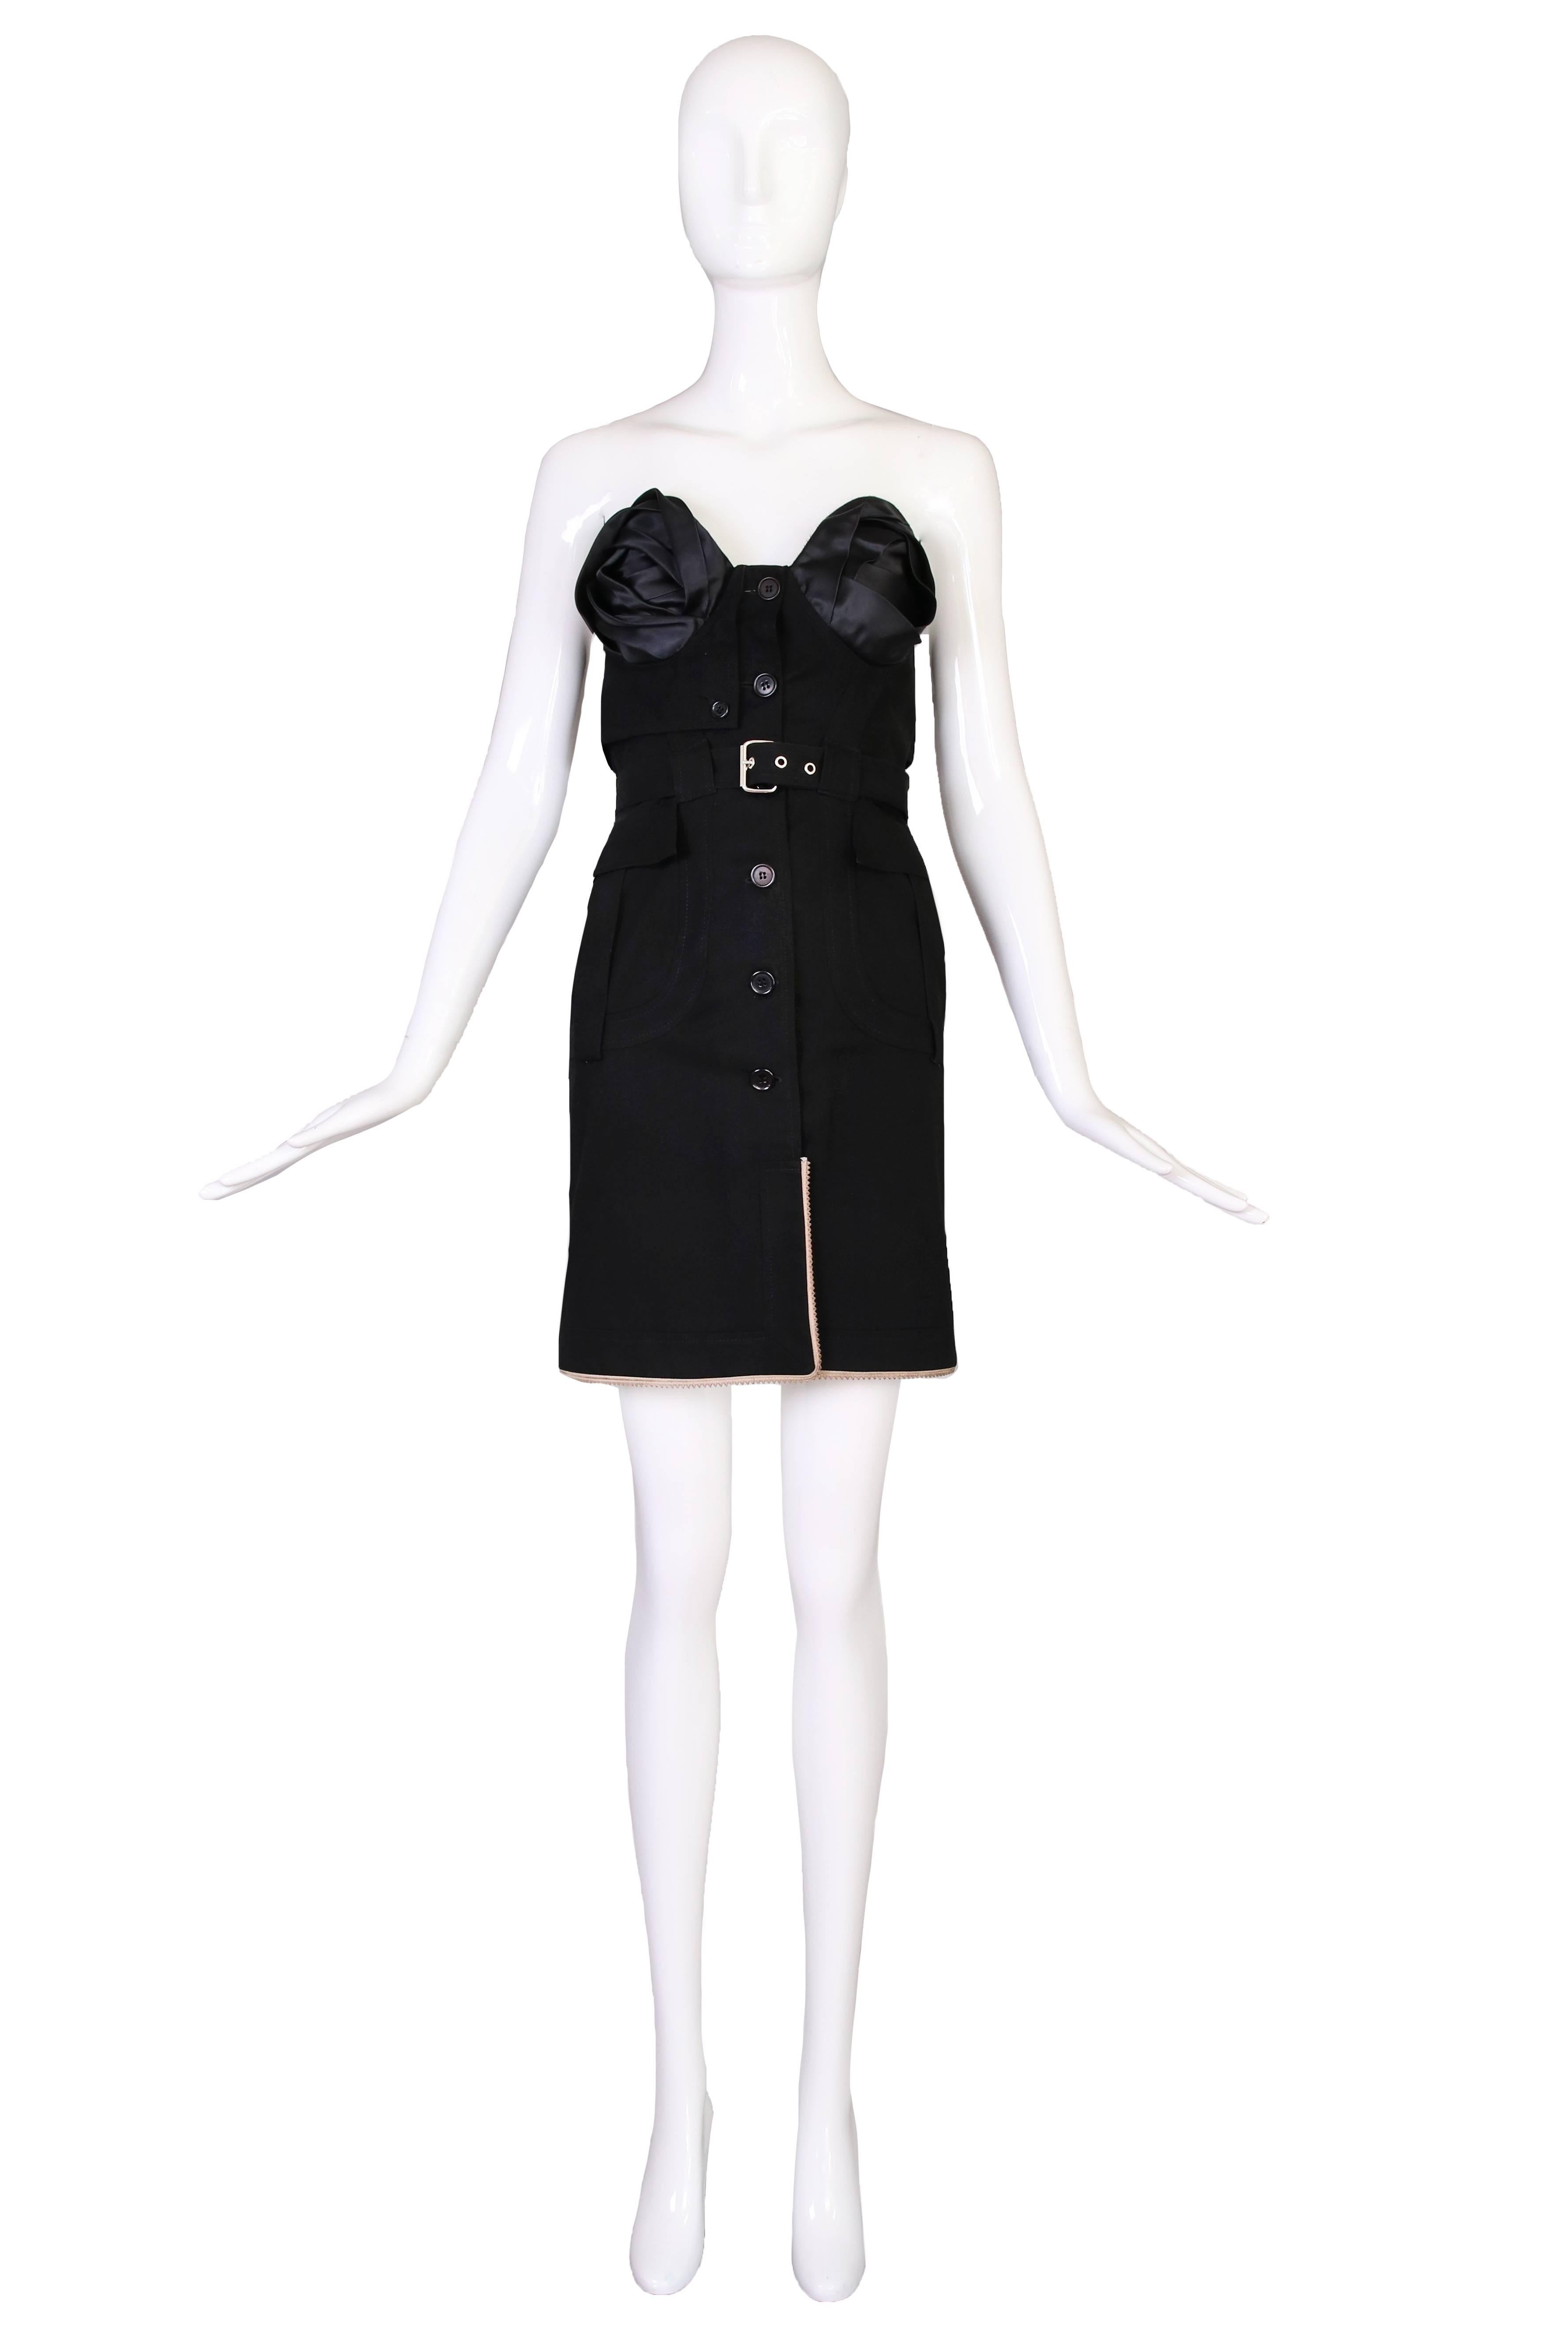 Antonio Berardi strapless little black mini dress with detachable belt - button closure up the front with triangle-shaped leather trim detail along the hem and frontal slit. No size tag - please consult measurements. In excellent